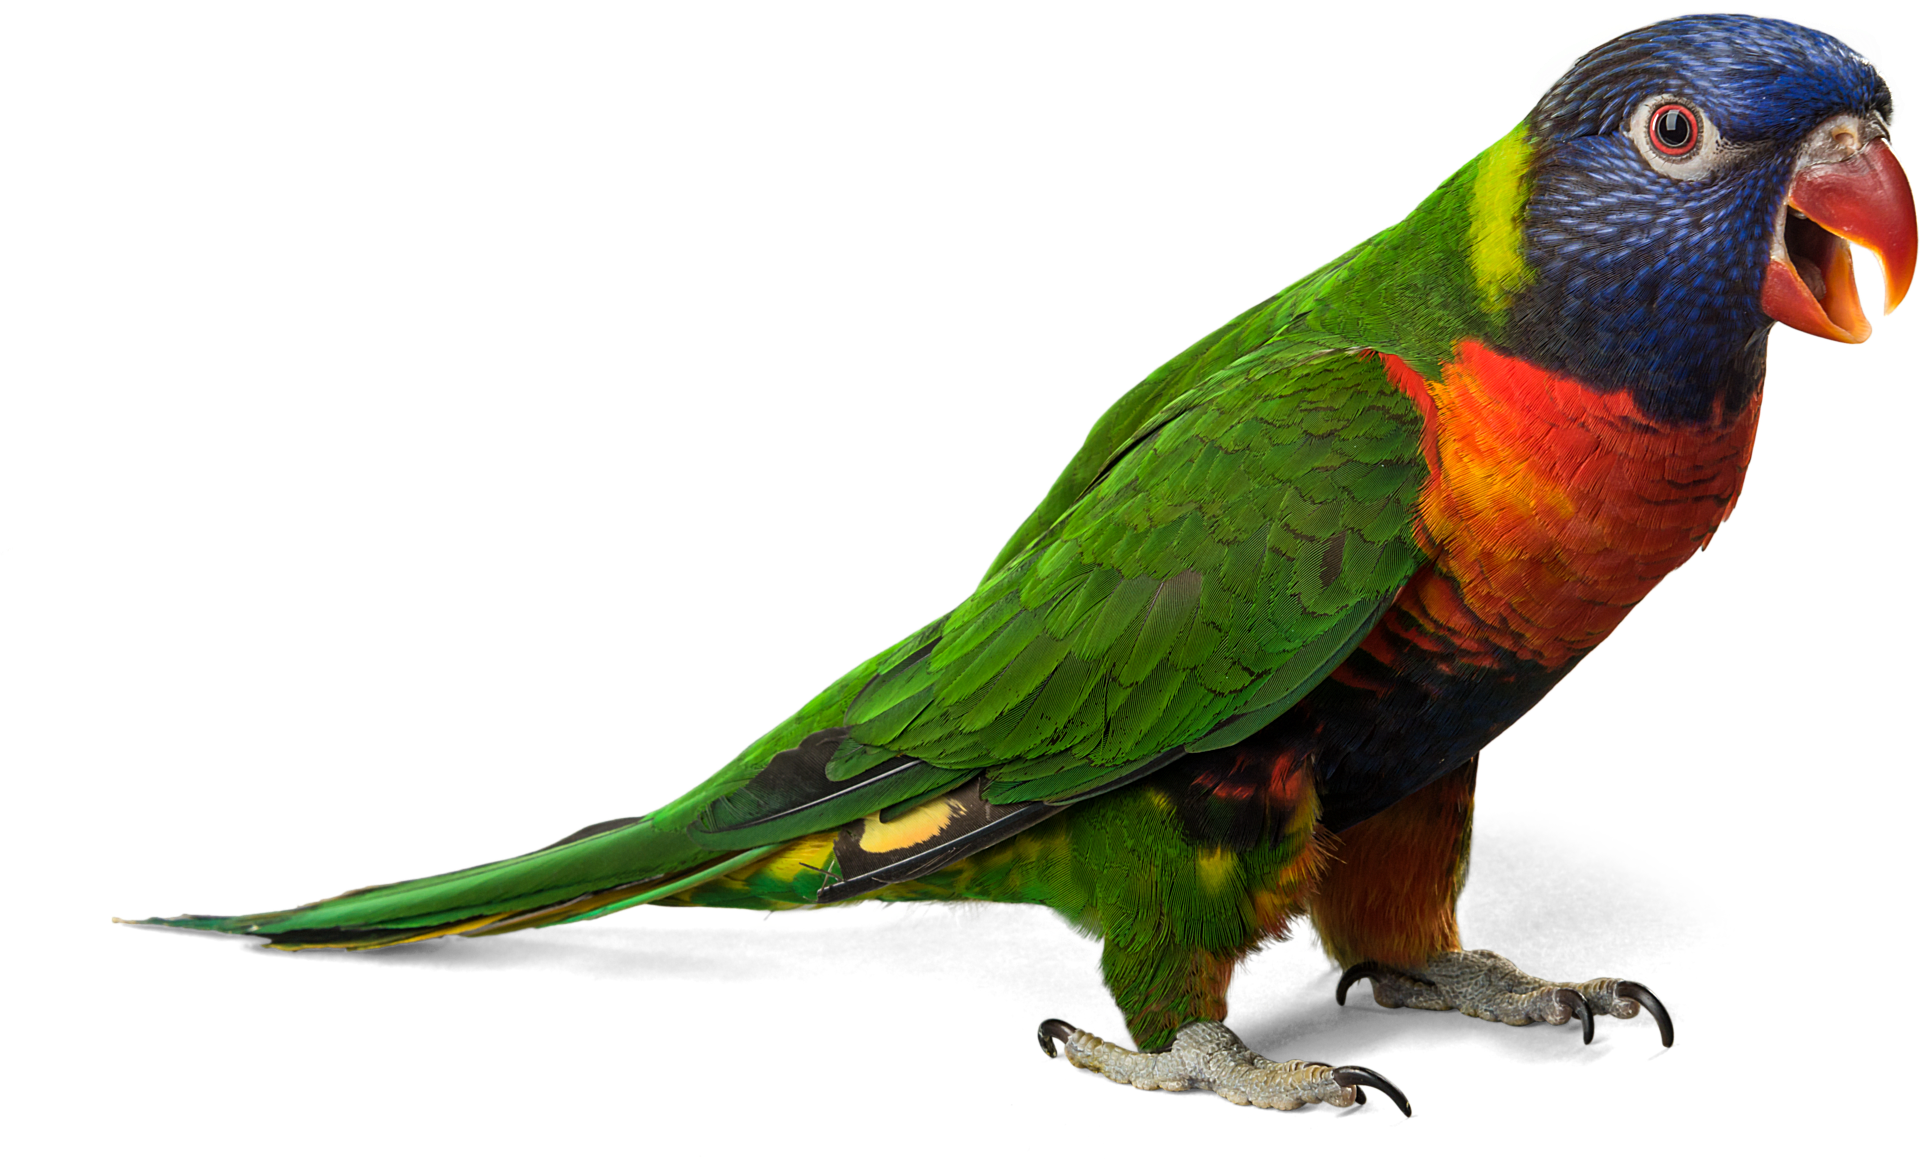 Green Parrot PNG Unduh Image